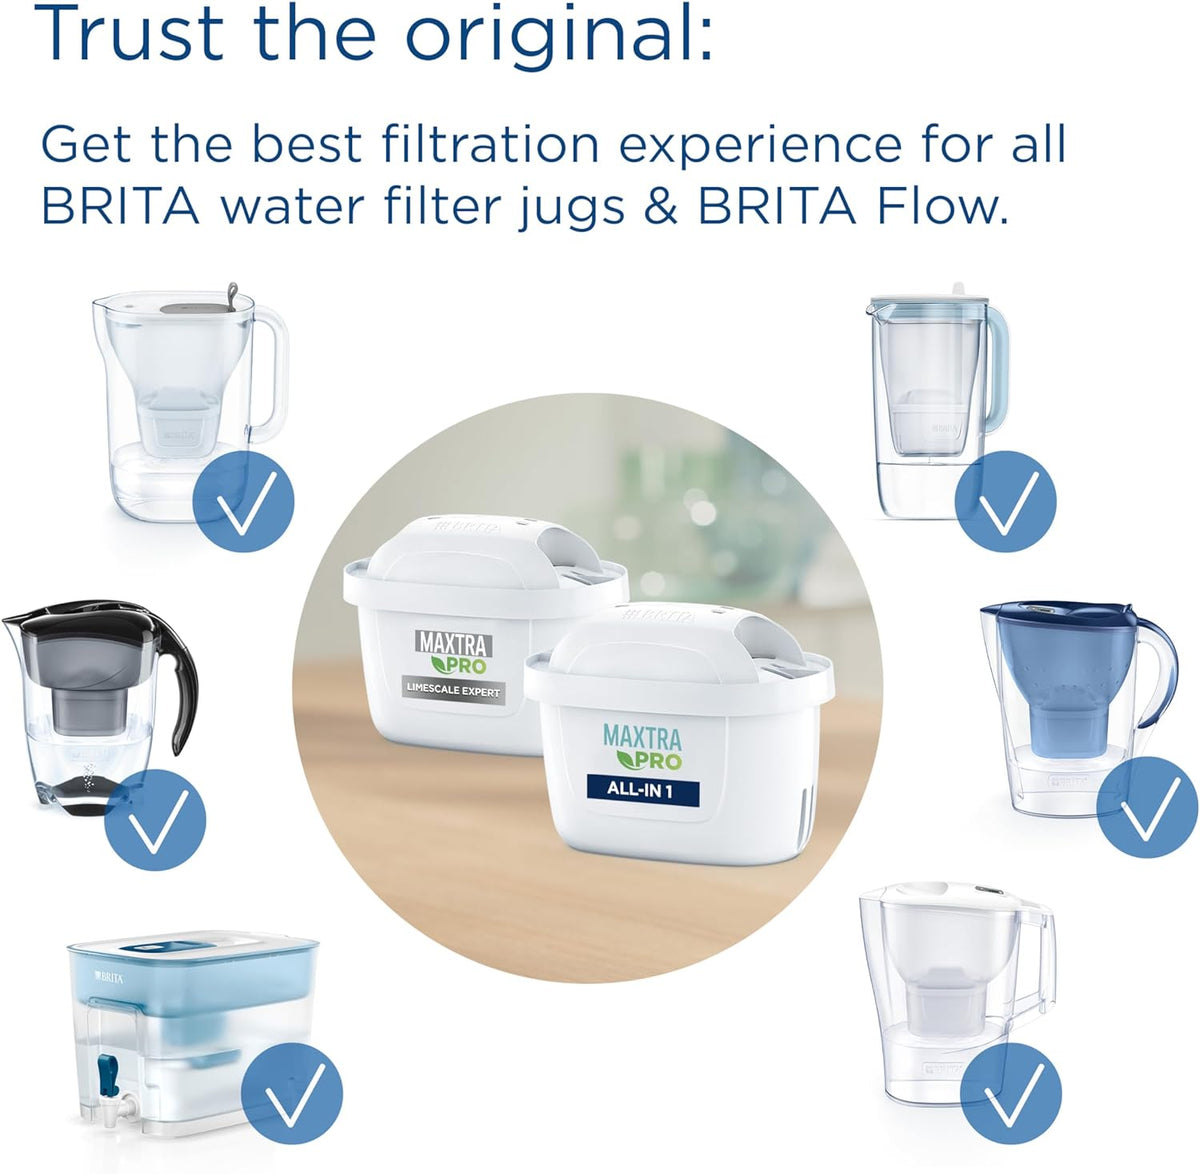 BRITA MAXTRA PRO All In One Water Filter Cartridge 6 Pack